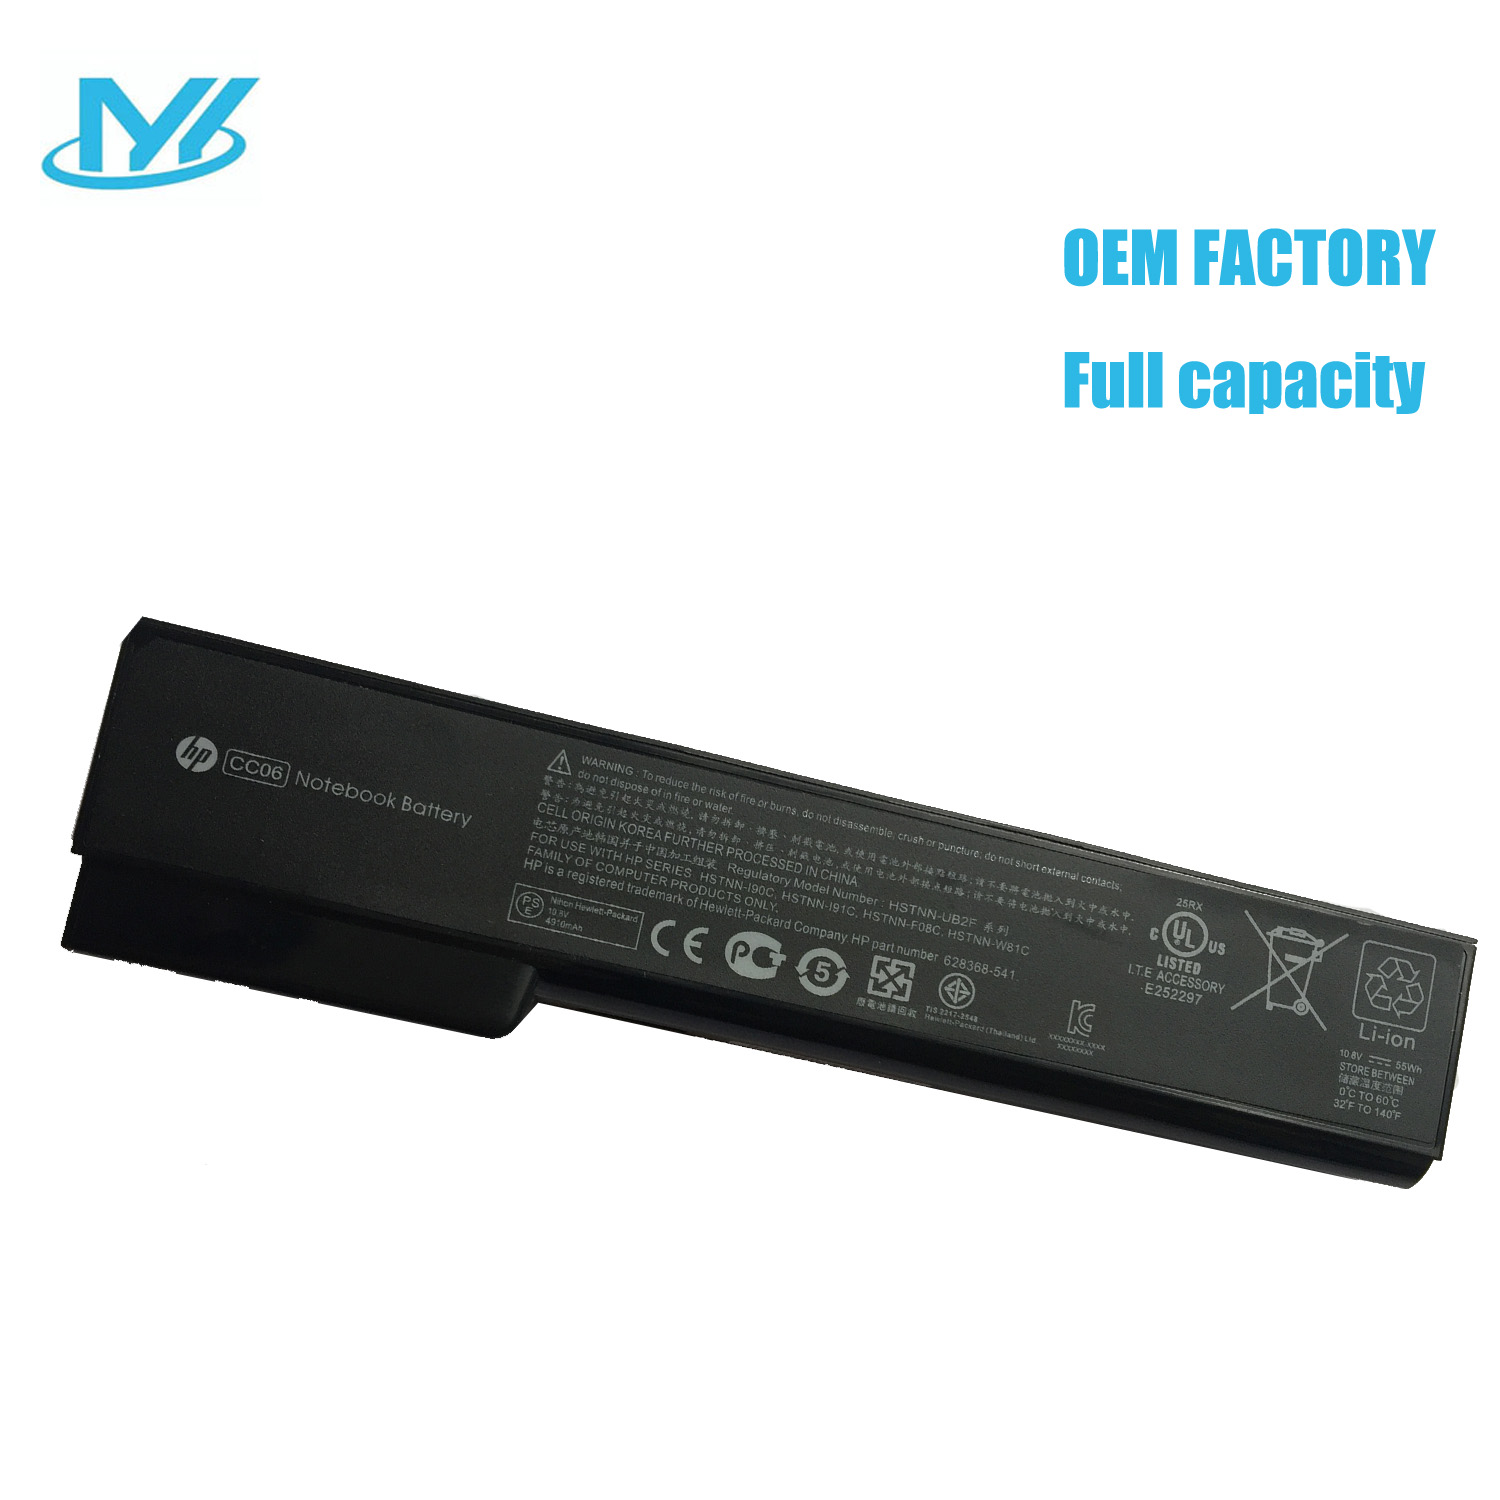 CC06 rechargeable lithium ion Notebook battery Laptop battery 11.55V 53Wh for HP laptop 8460p 8470 8650P 8670P